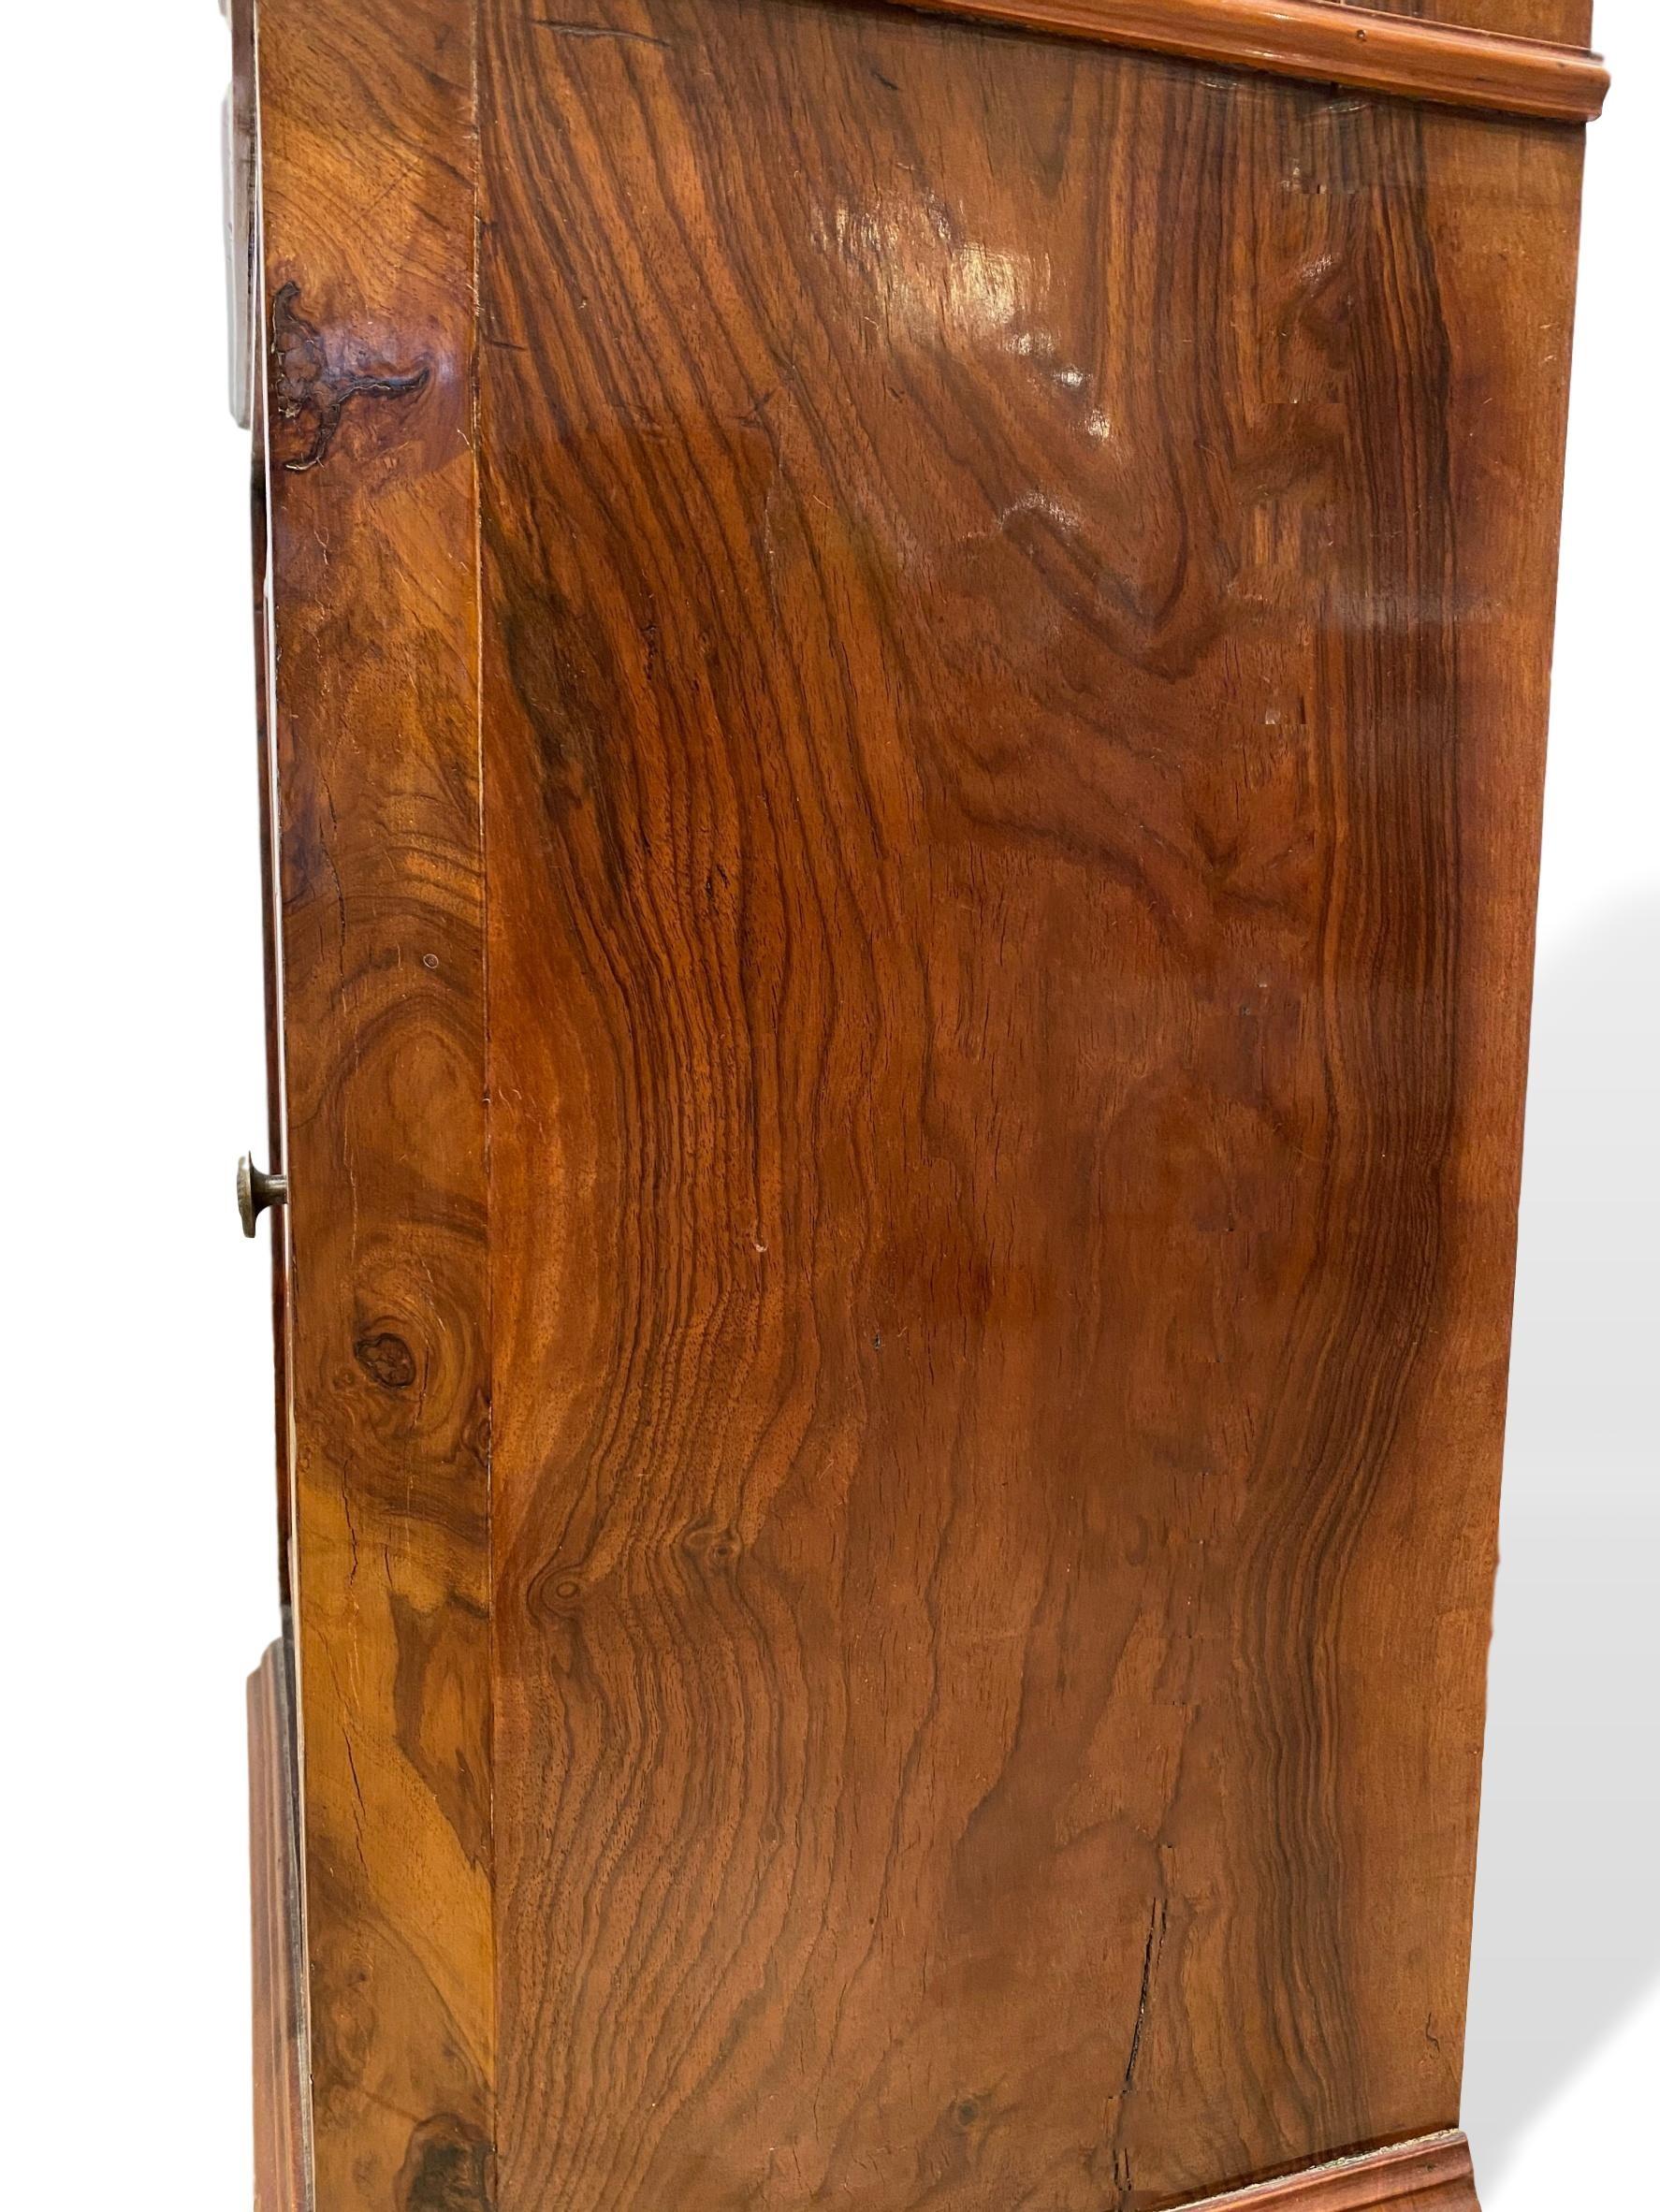 Marble-Top Side Cabinet, Figured Burl Walnut with Marquetry Inlay, Italian, 1880 1